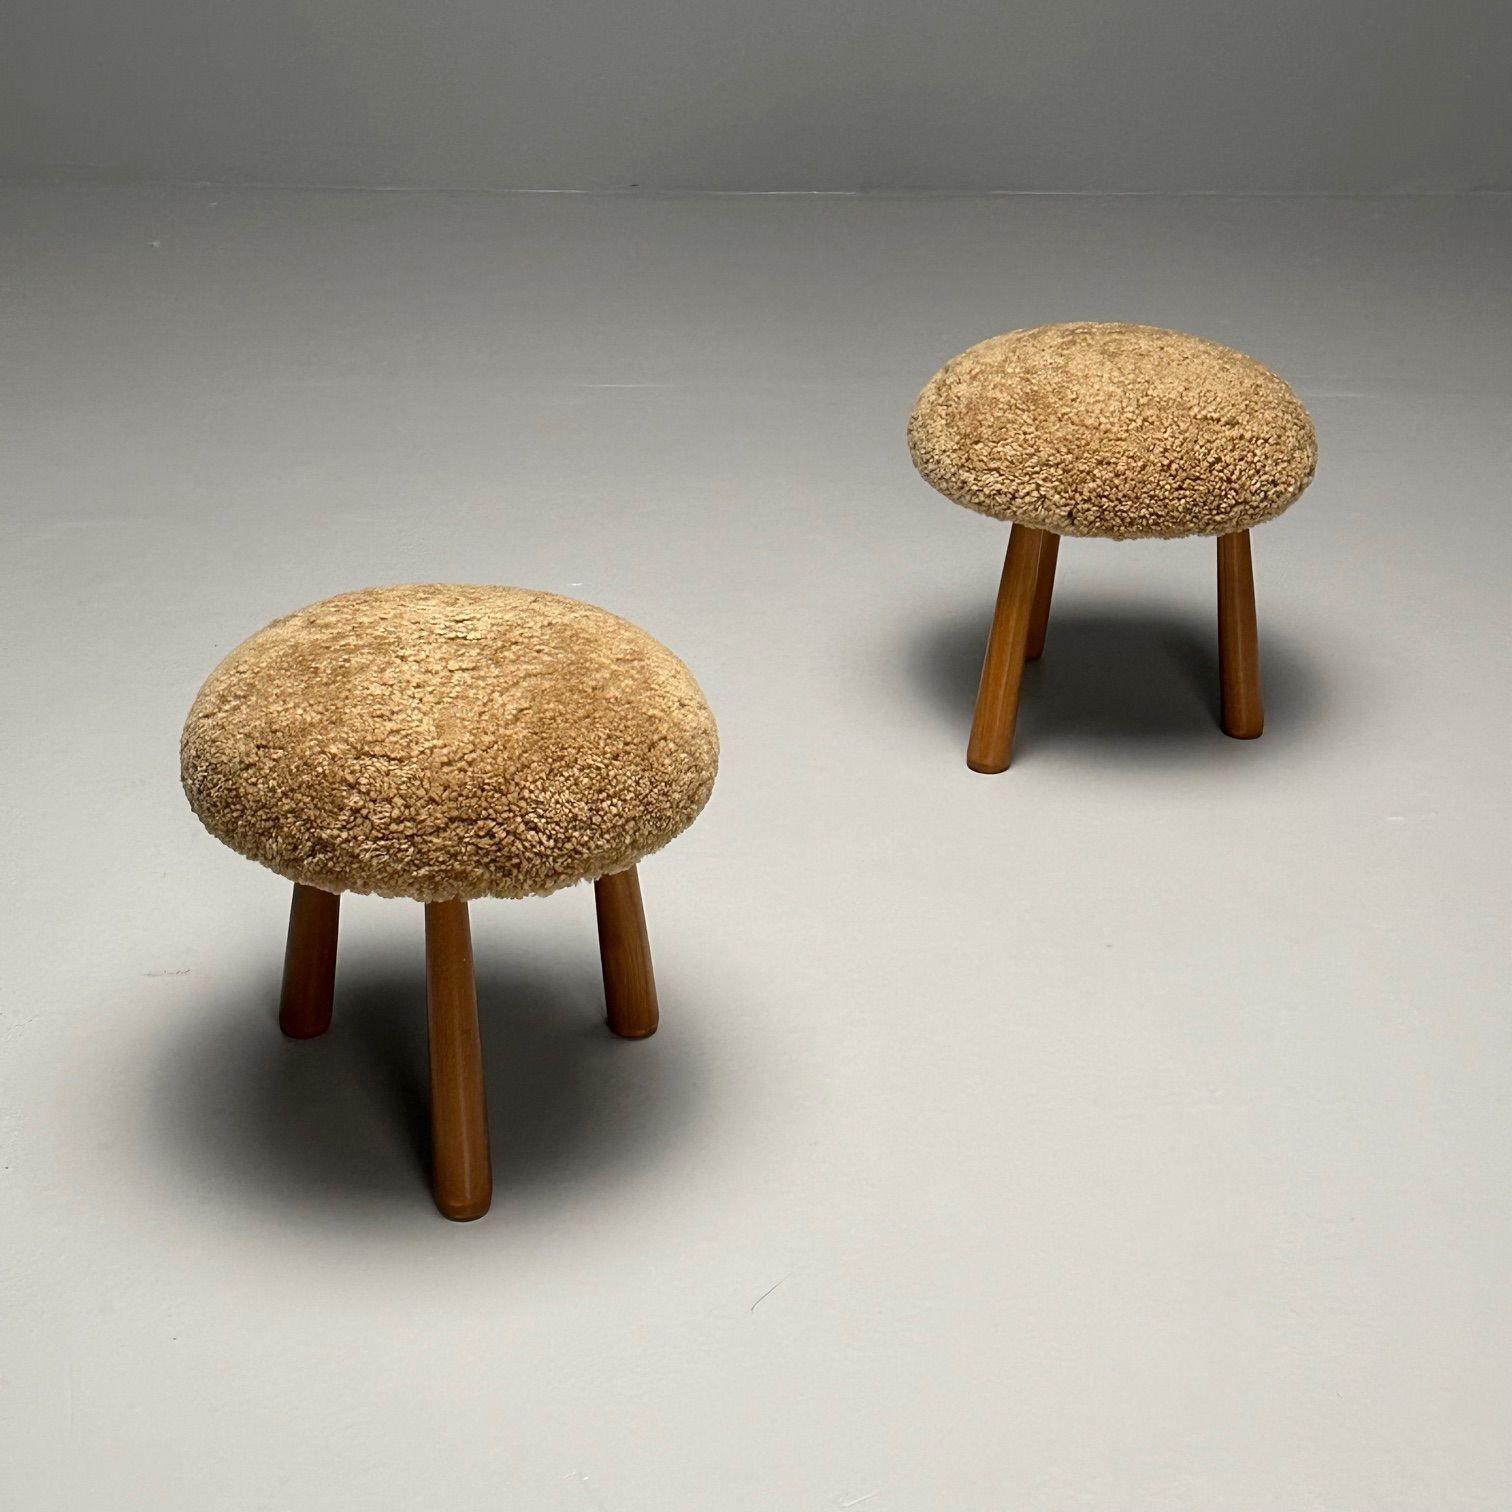 Two Contemporary Sheepskin Foot stools, Ottomans, Swedish Modern, Shearling
Contemporary organic form tri-pod footstools or ottomans. New comfortable foam cushioning and 17 mm high quality Australian curly sheepskin. Overall form and design inspired